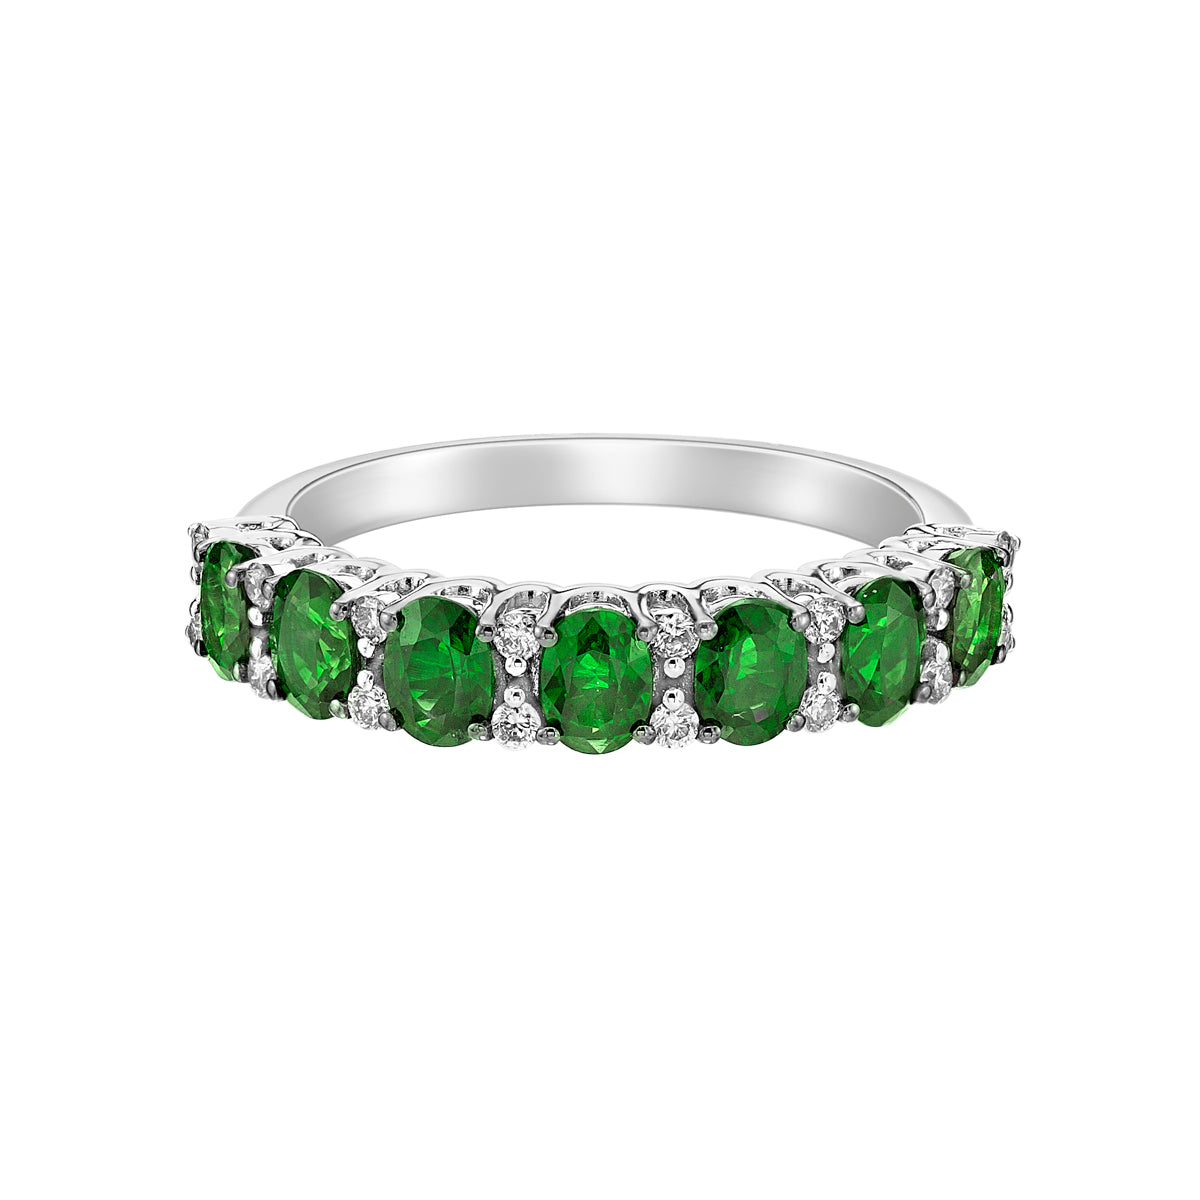 14K White Gold Prong-set Emerald Ring with Diamonds